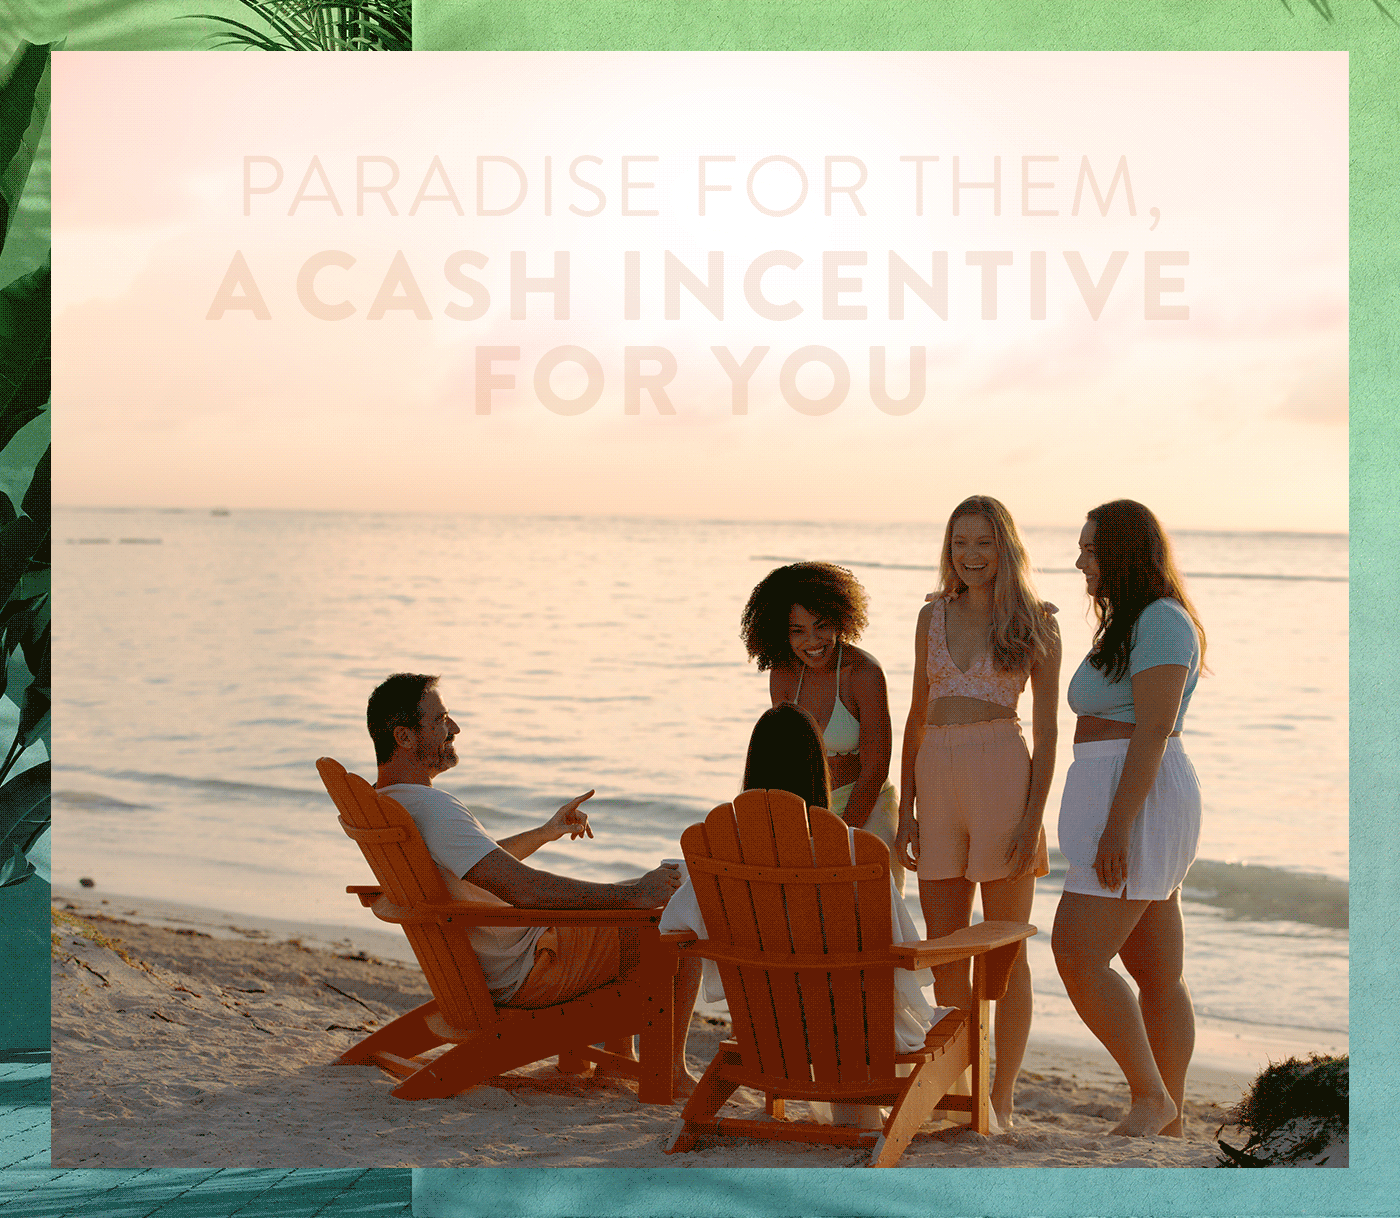 Paradise for them, a cash incentive for you